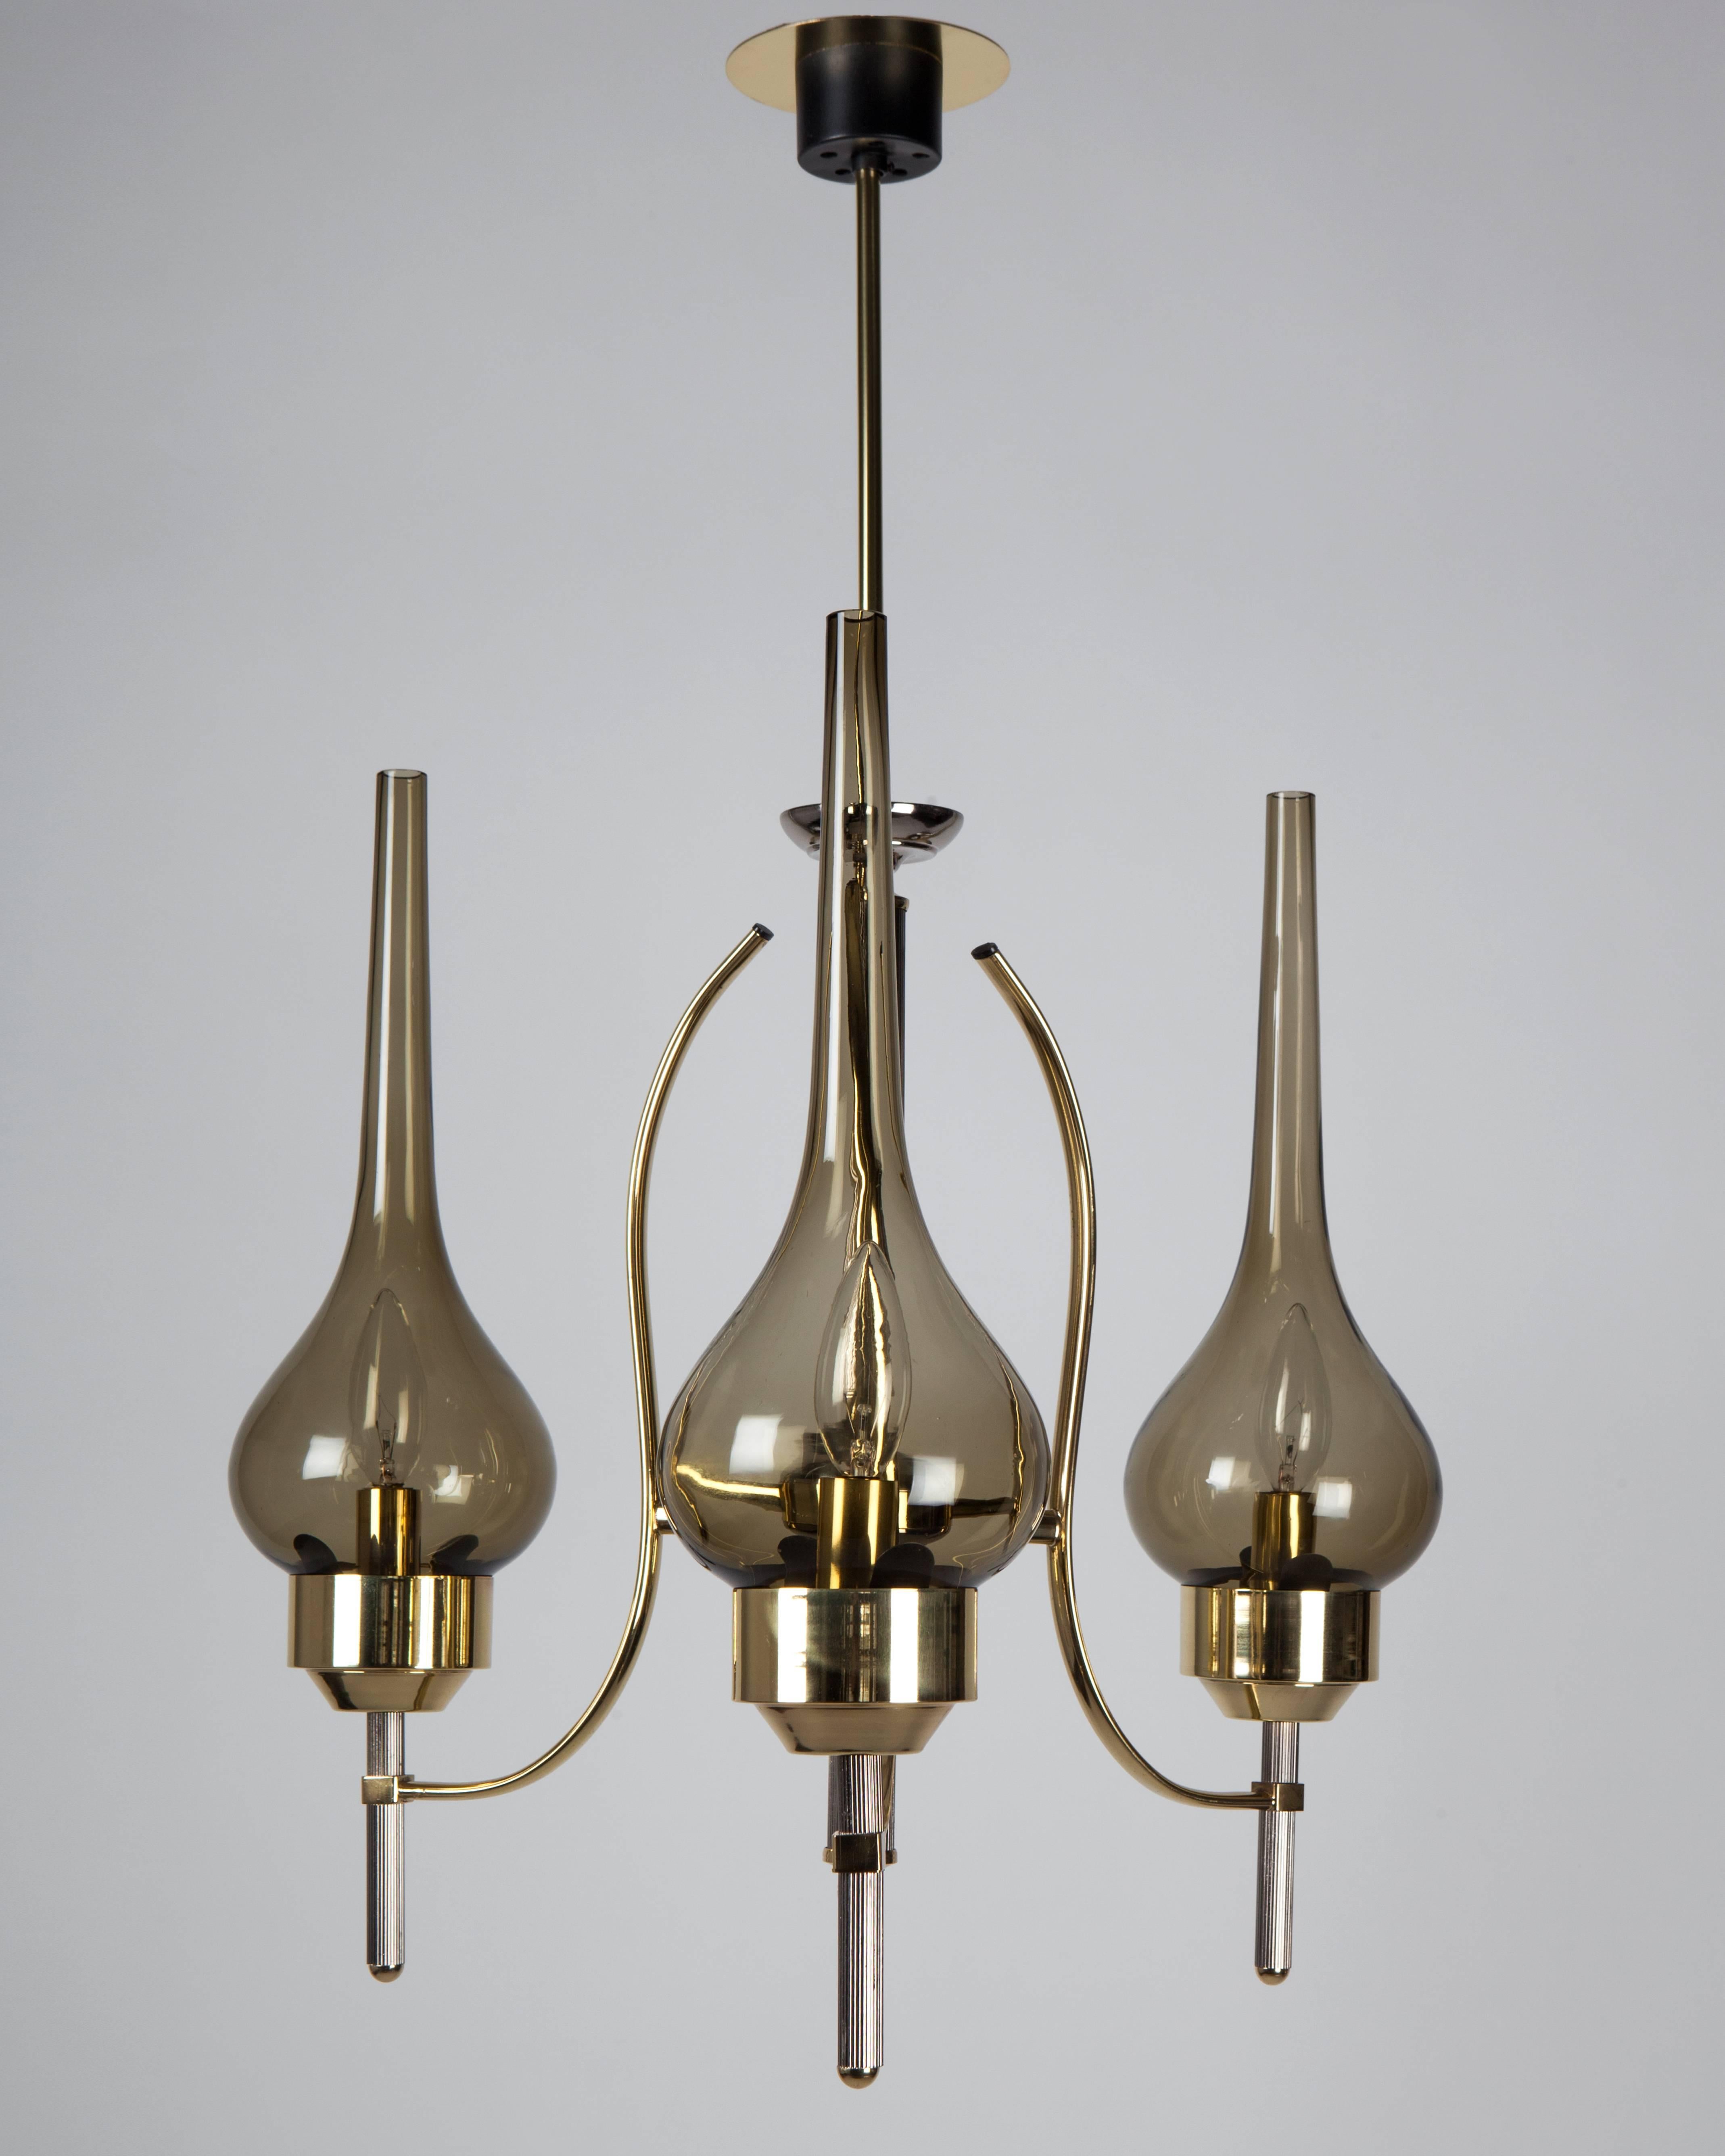 AHL4048

A three light Italian smoked glass chandelier in its original polished brass and nickel finish. Due to the antique nature of this fixture, there may be some nicks or imperfections in the glass.

Dimensions:
Current height: 30